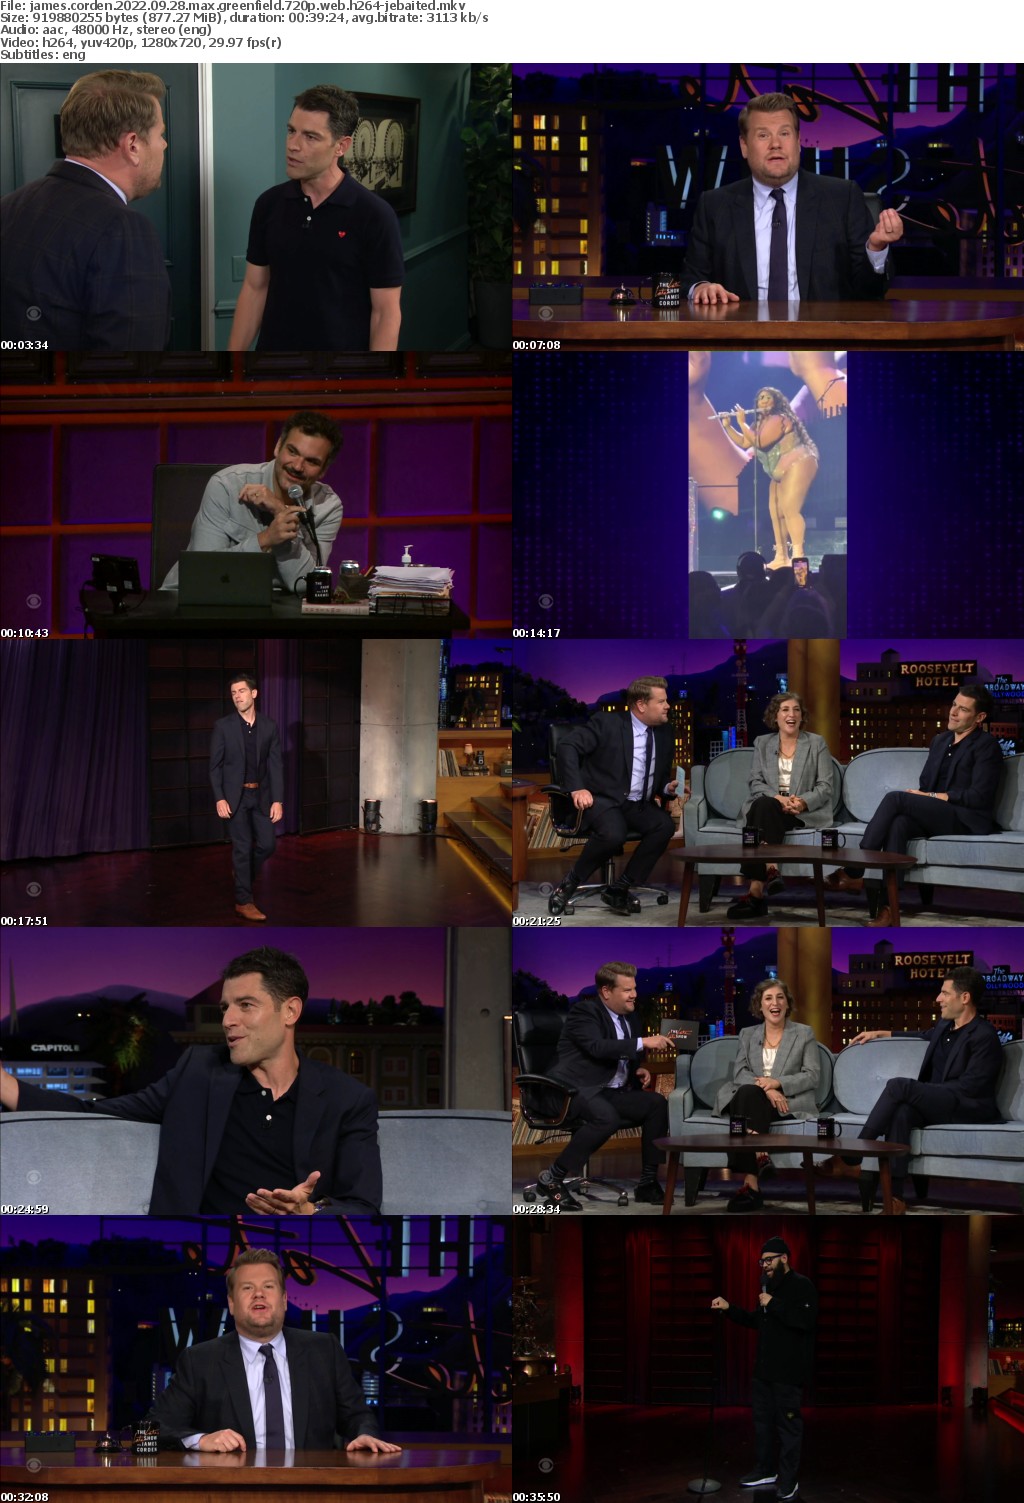 James Corden 2022 09 28 Max Greenfield 720p WEB H264-JEBAITED